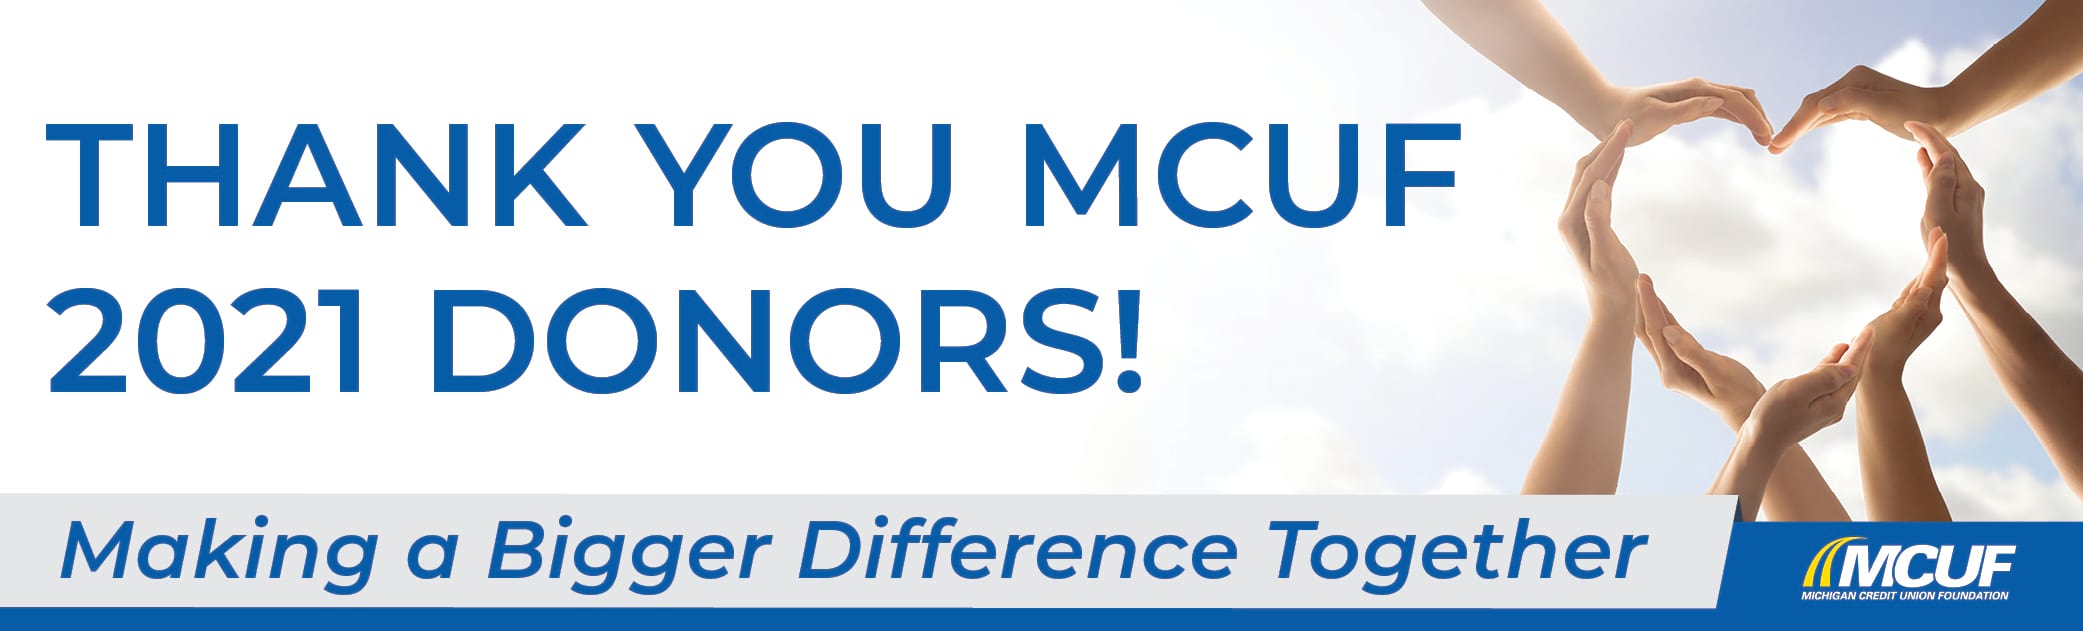 MCUF donors